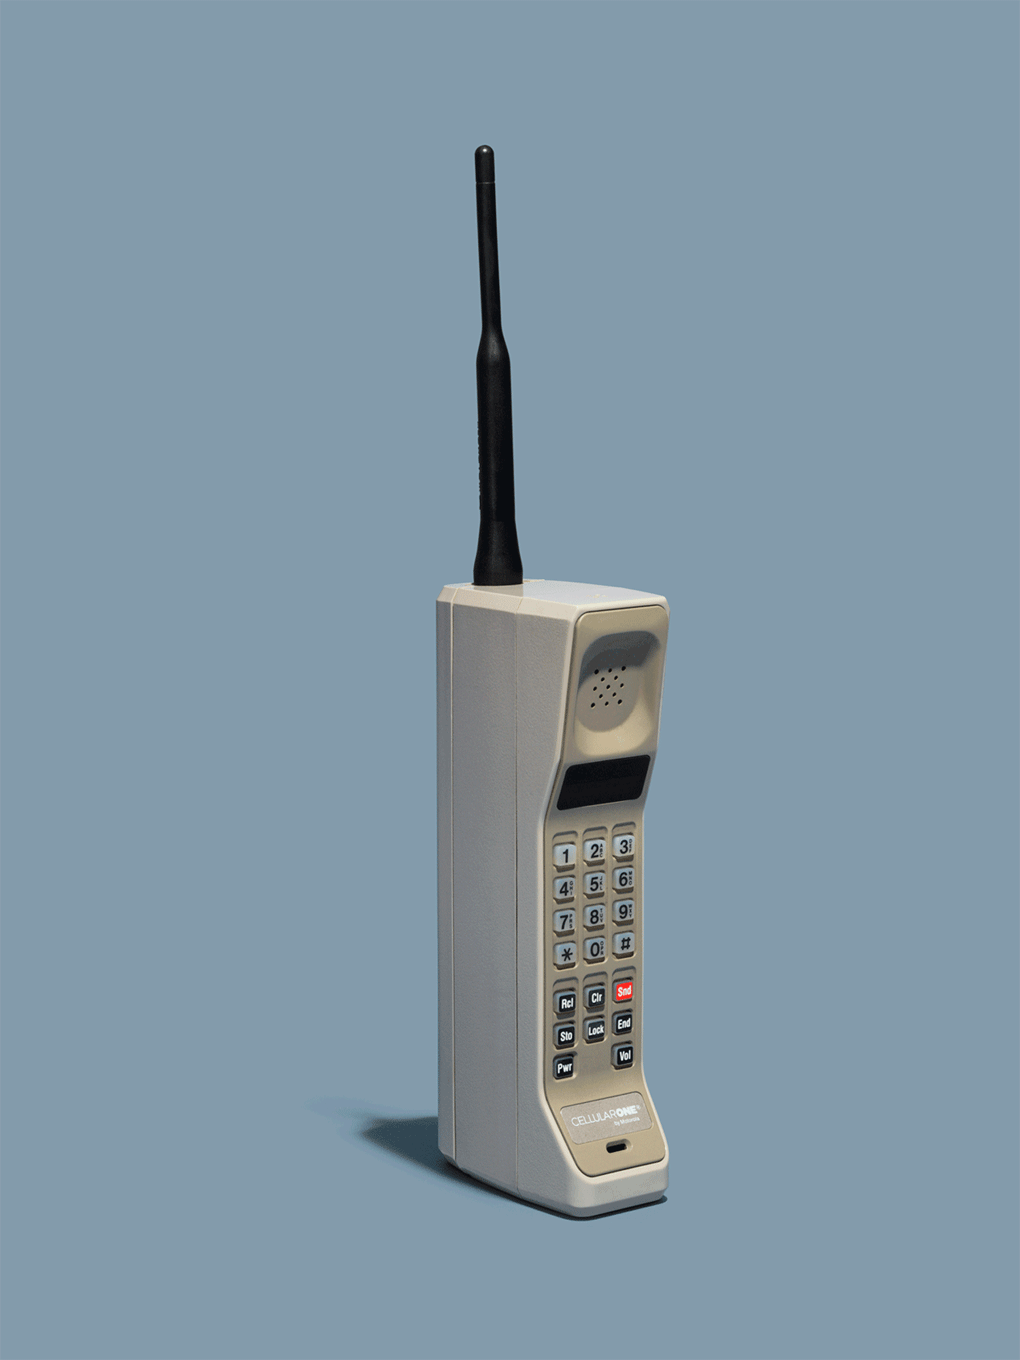 Relics-of-Technology-Brick-Phone.gif